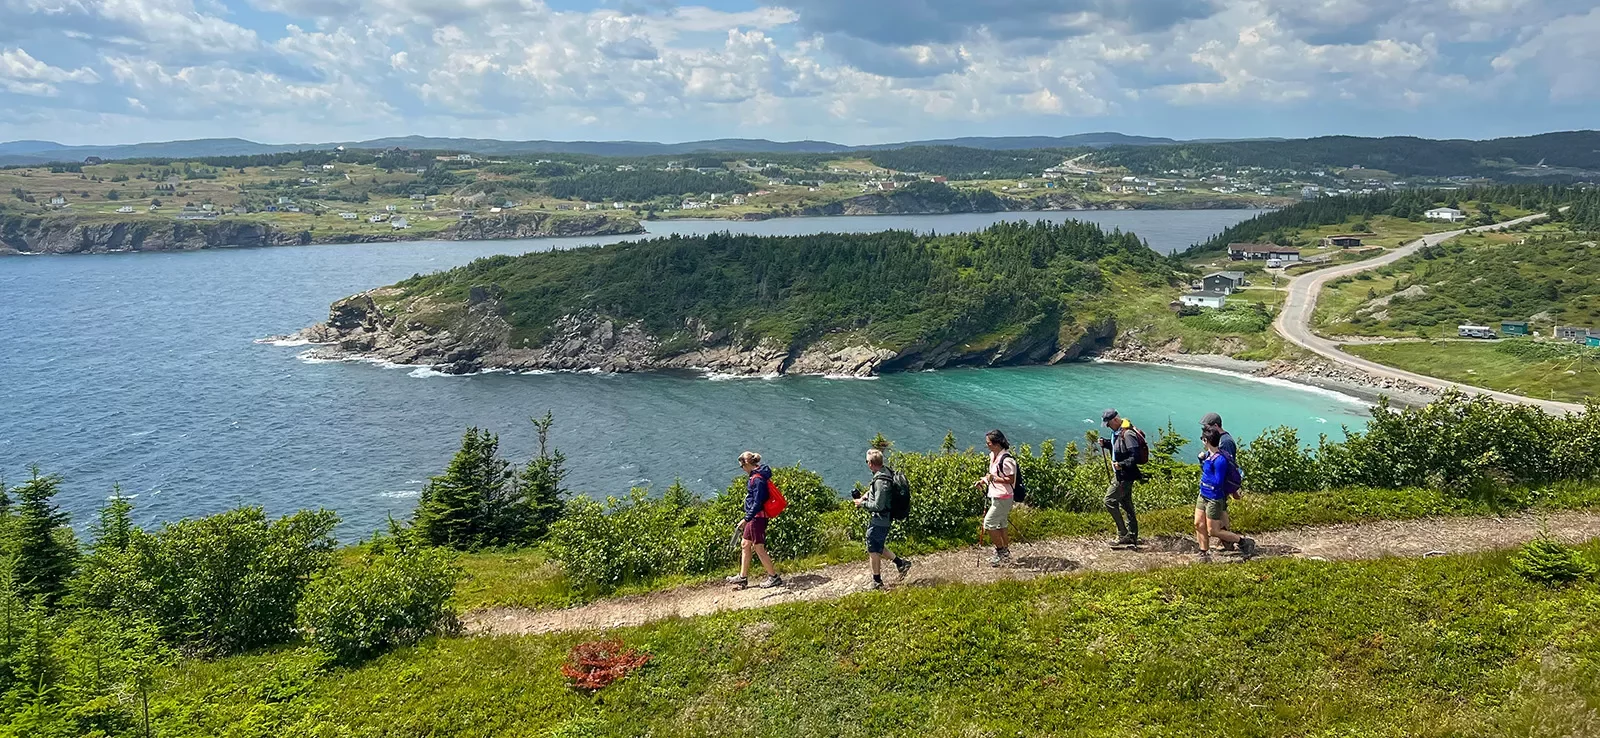 Six guests walking down coastal trail, small beach, ocean, houses in distance.